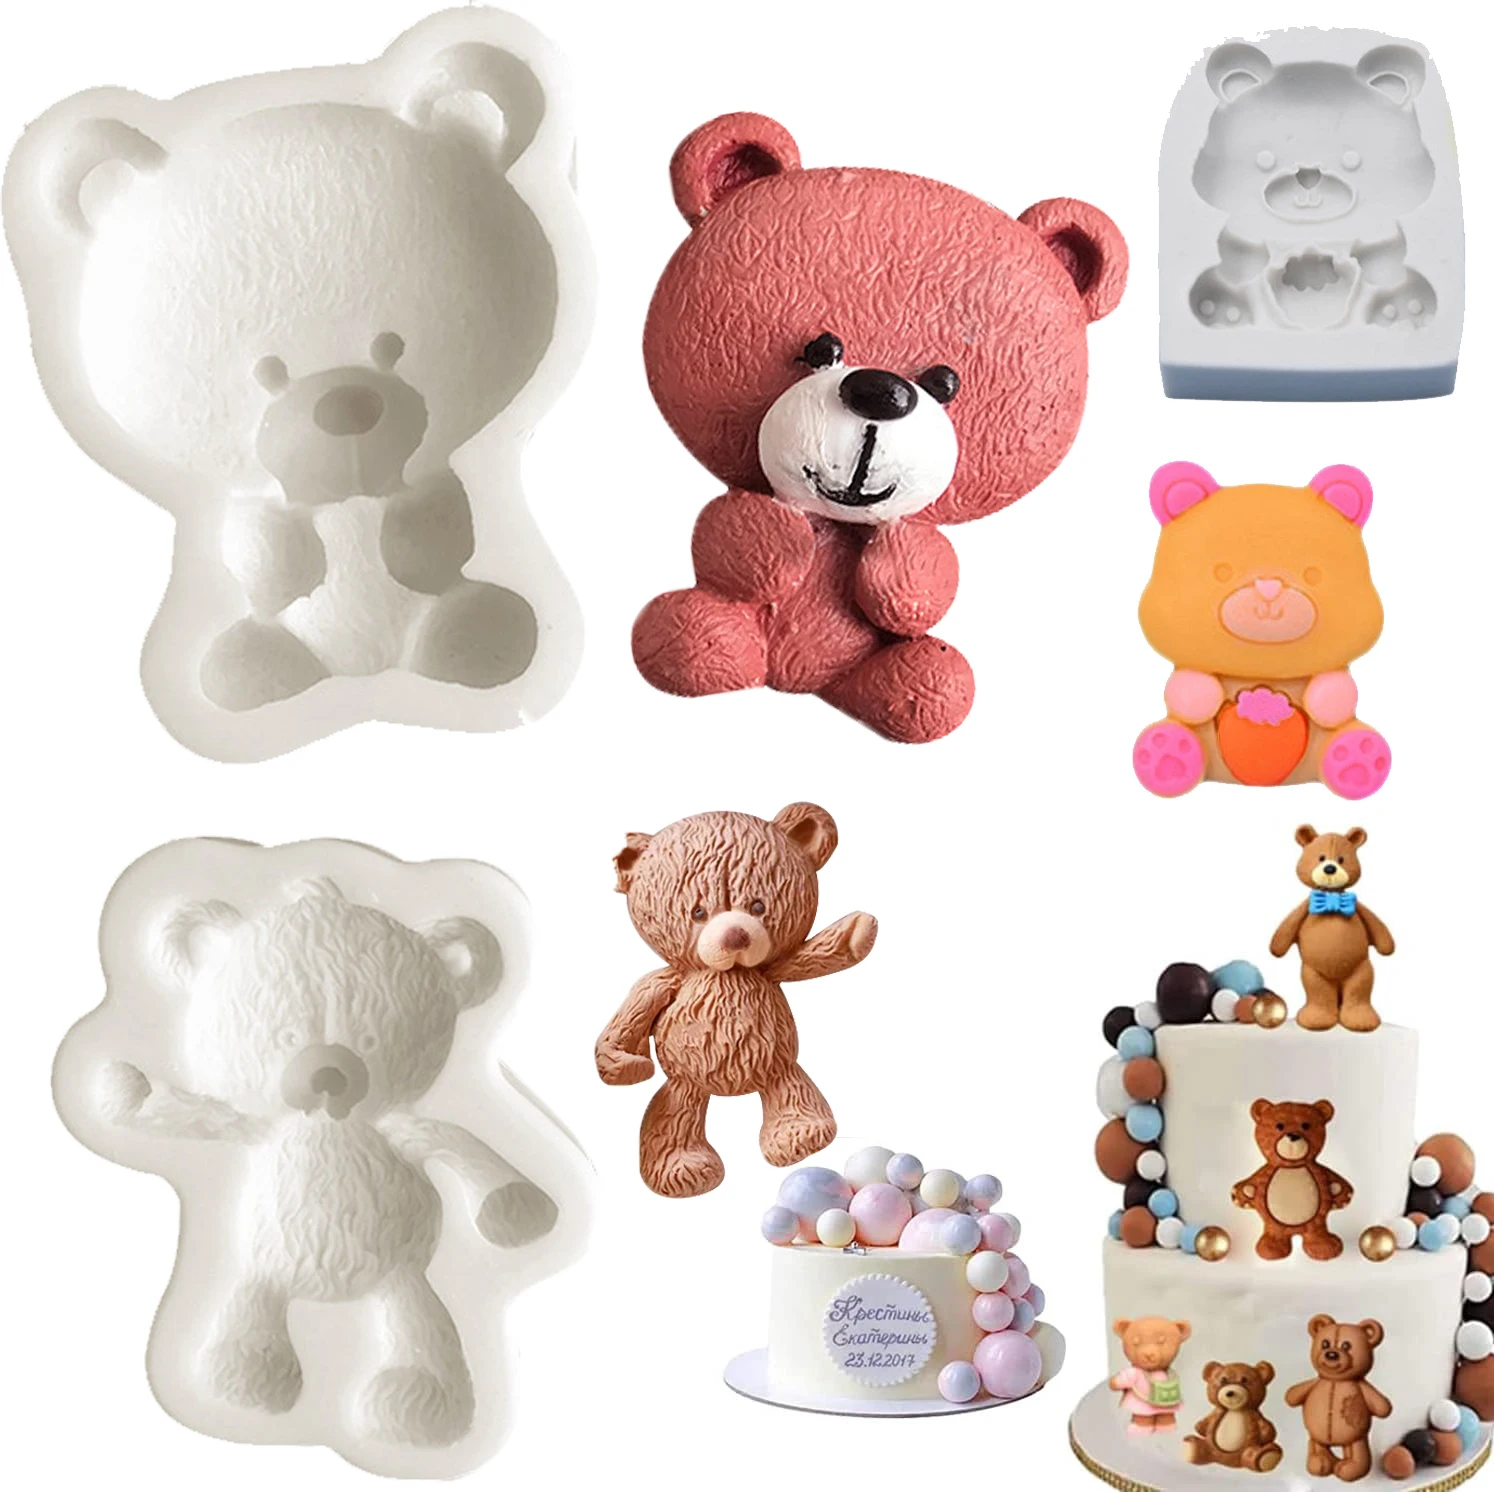 

Bears Silicone Fondant Cake Molds for Baking Decoration Tools Topper Mould Sugar Craft Cookie Cutters Set Biscuit Jelly Sweet